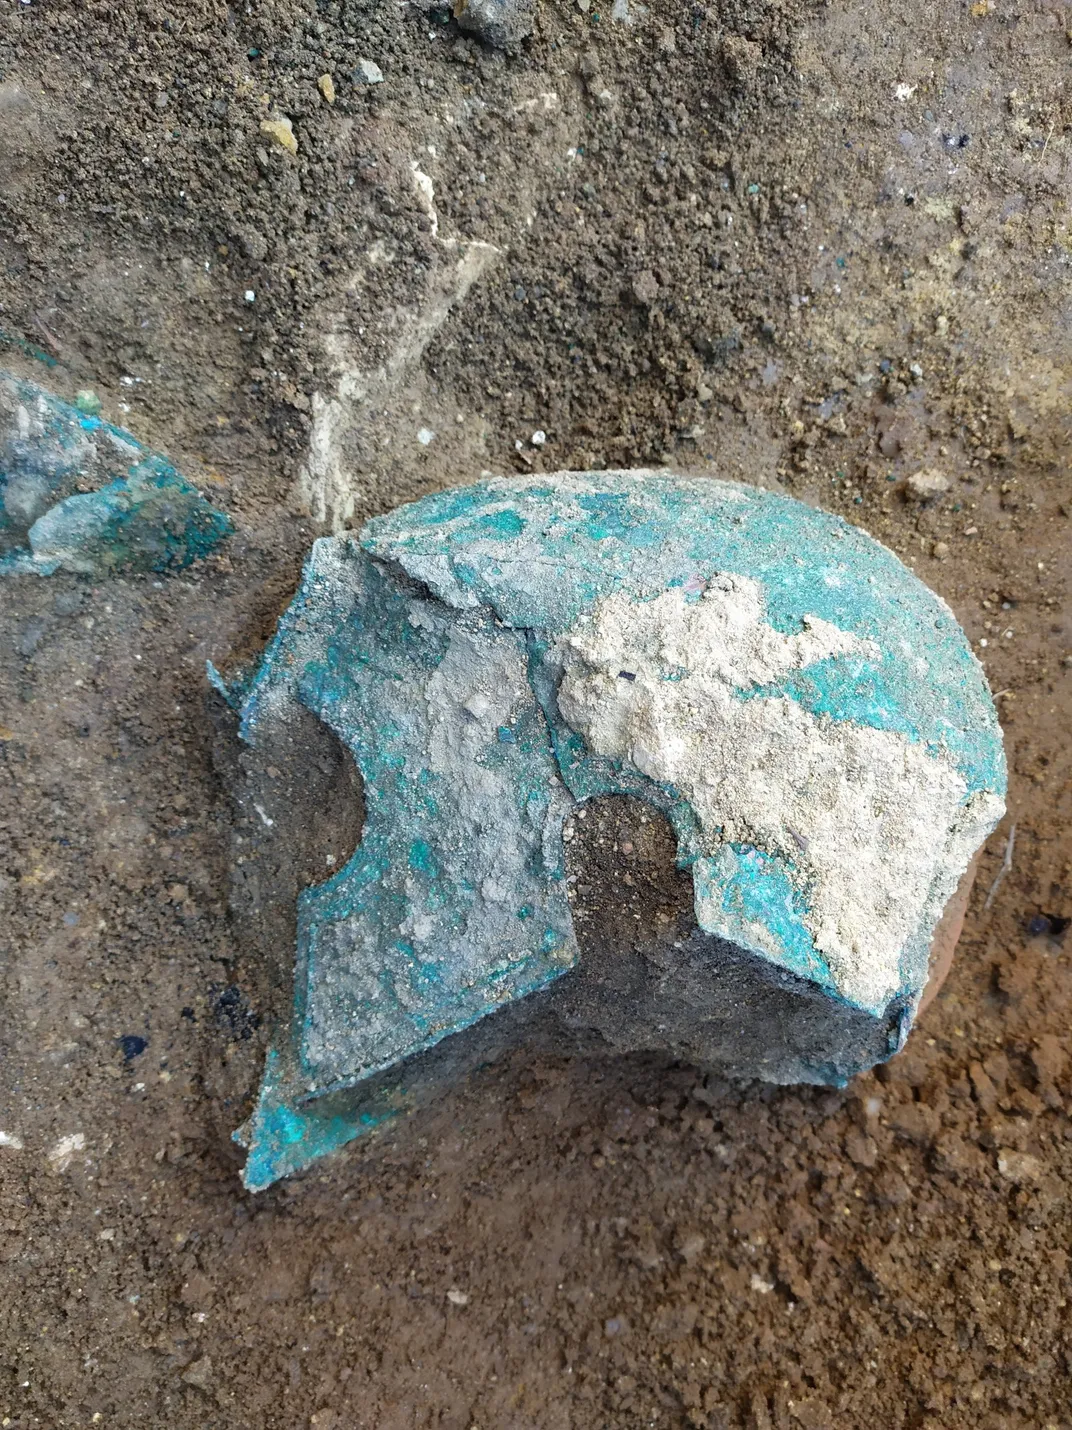 A Chalcidian helmet unearthed in the ancient Greek city of Velia